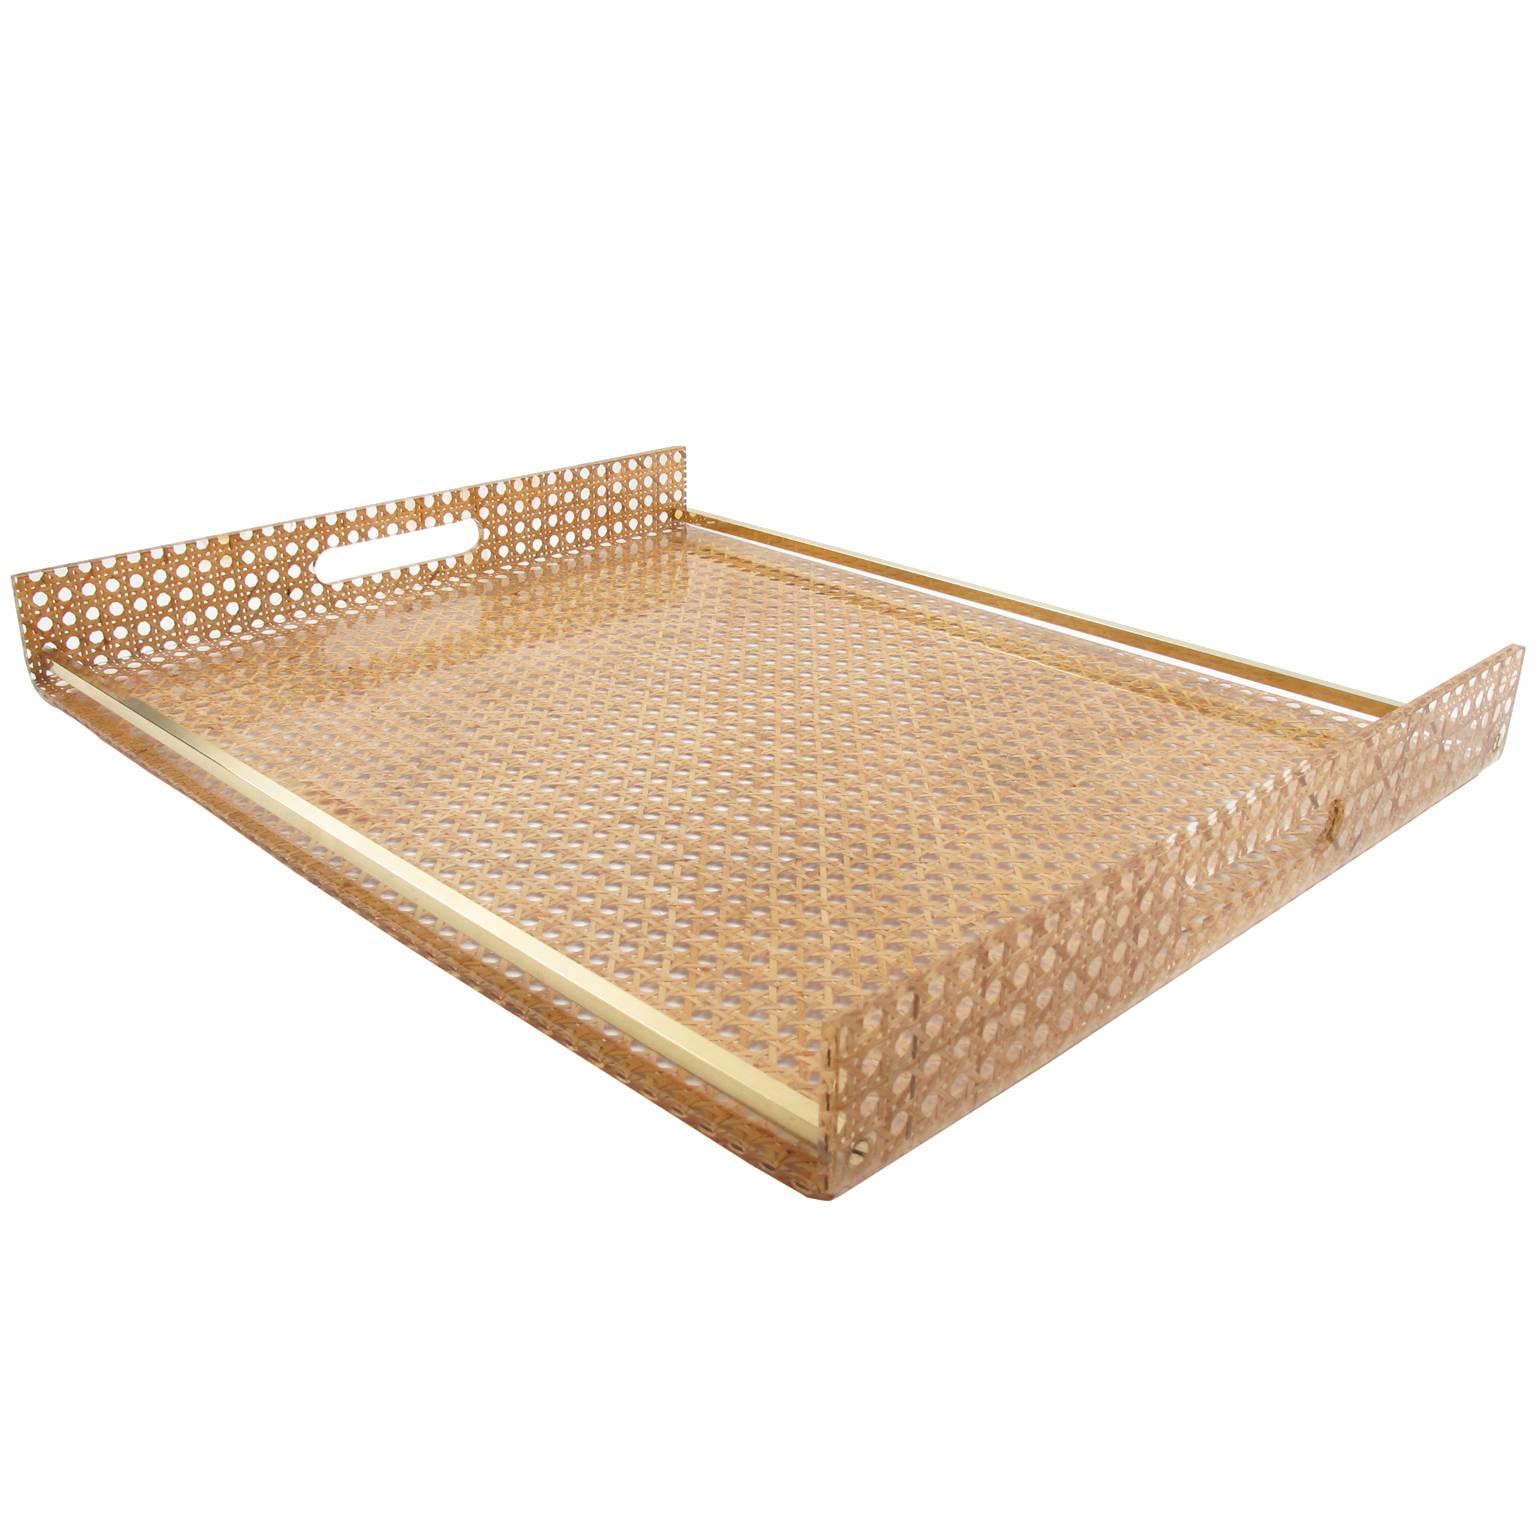 1970s Lucite and Rattan Serving Tray by Christian Dior Home Collection